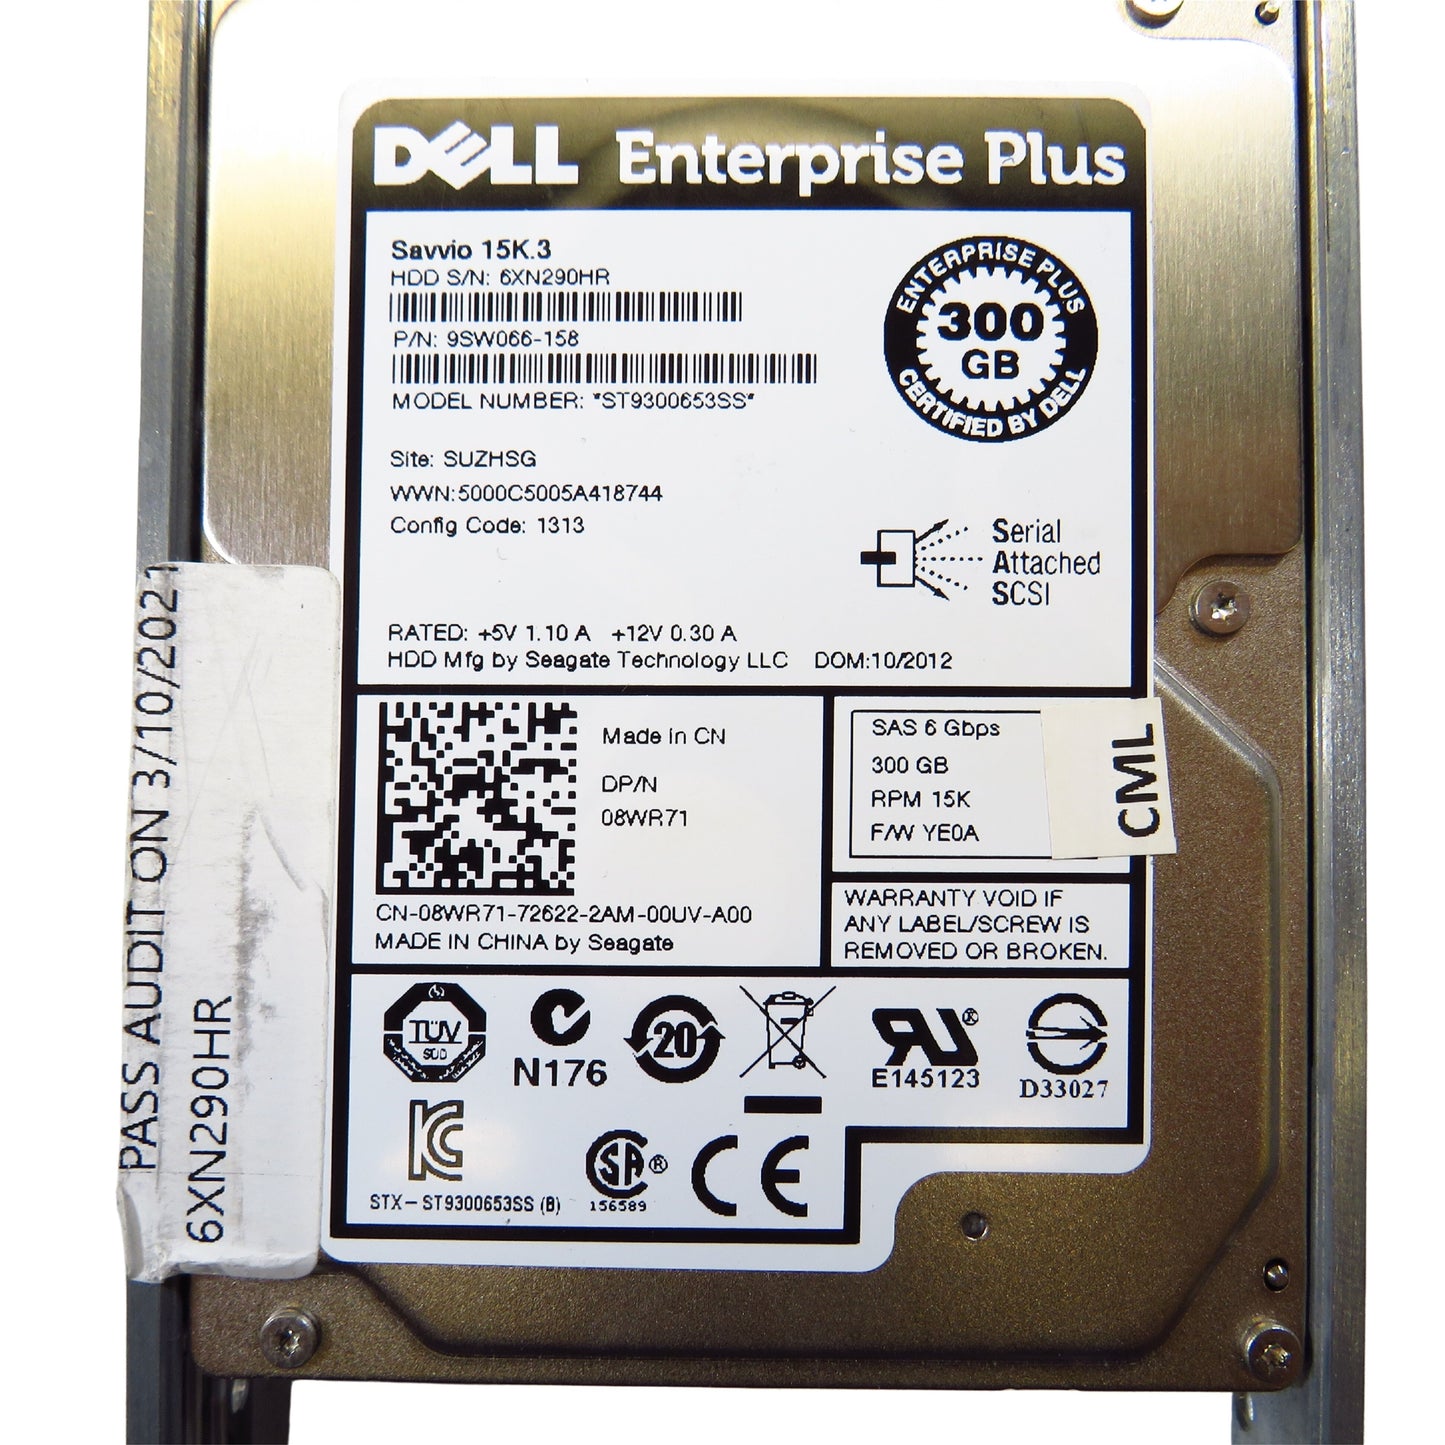 Dell Compellent 8WR71 300GB 15K RPM 2.5" SAS 6Gbps HDD Hard Drive (Refurbished)